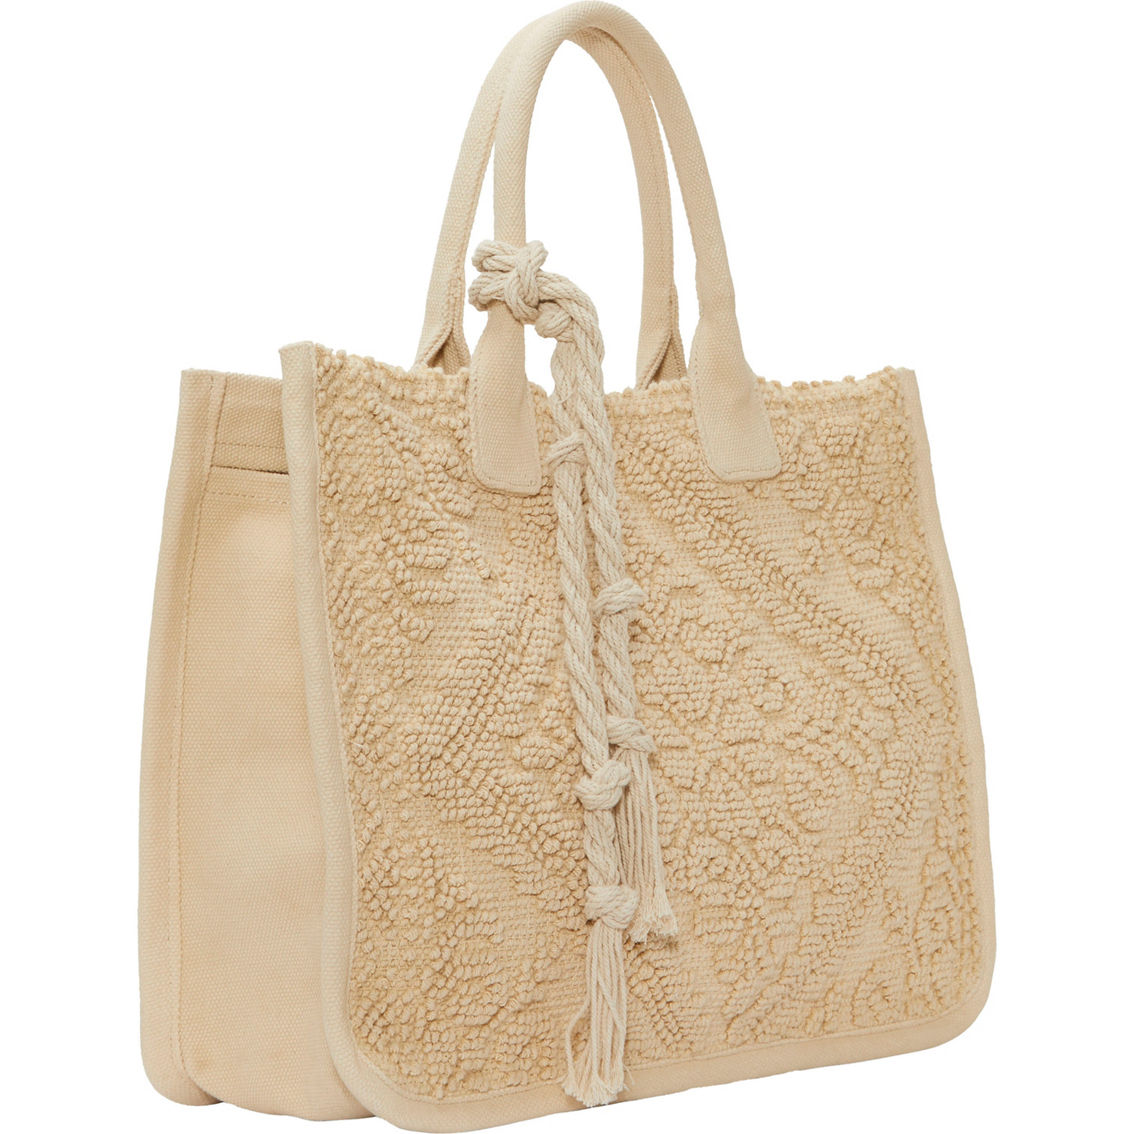 Vince Camuto Orla Tote - Image 3 of 5